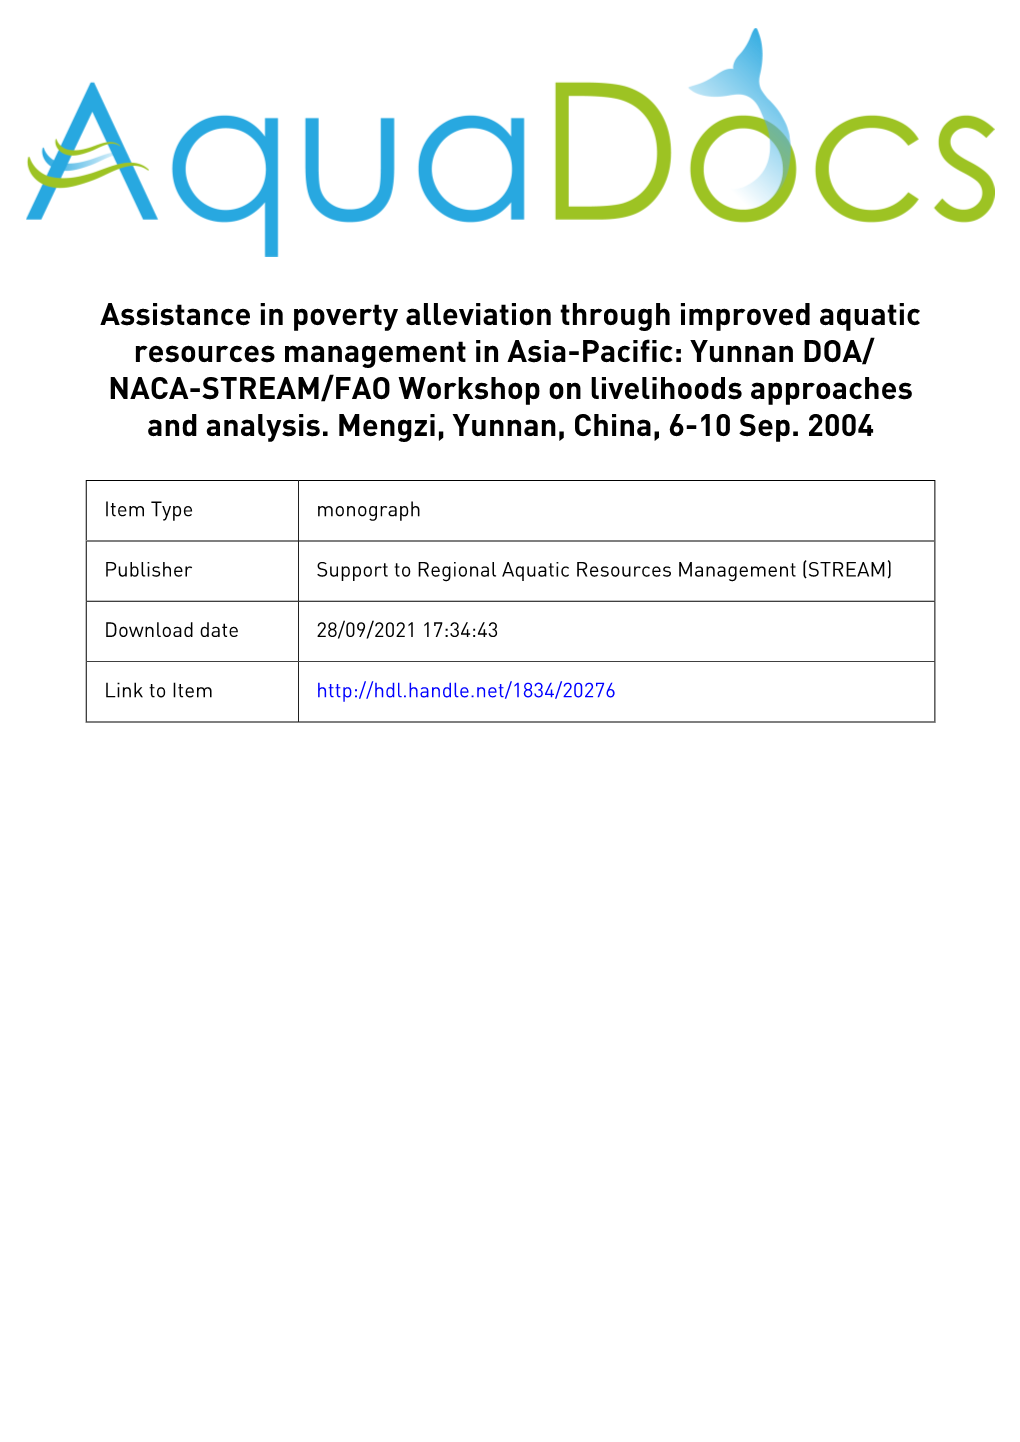 Yunnan DOA/NACA-STREAM/FAO Workshop on Livelihoods Approaches and Analysis